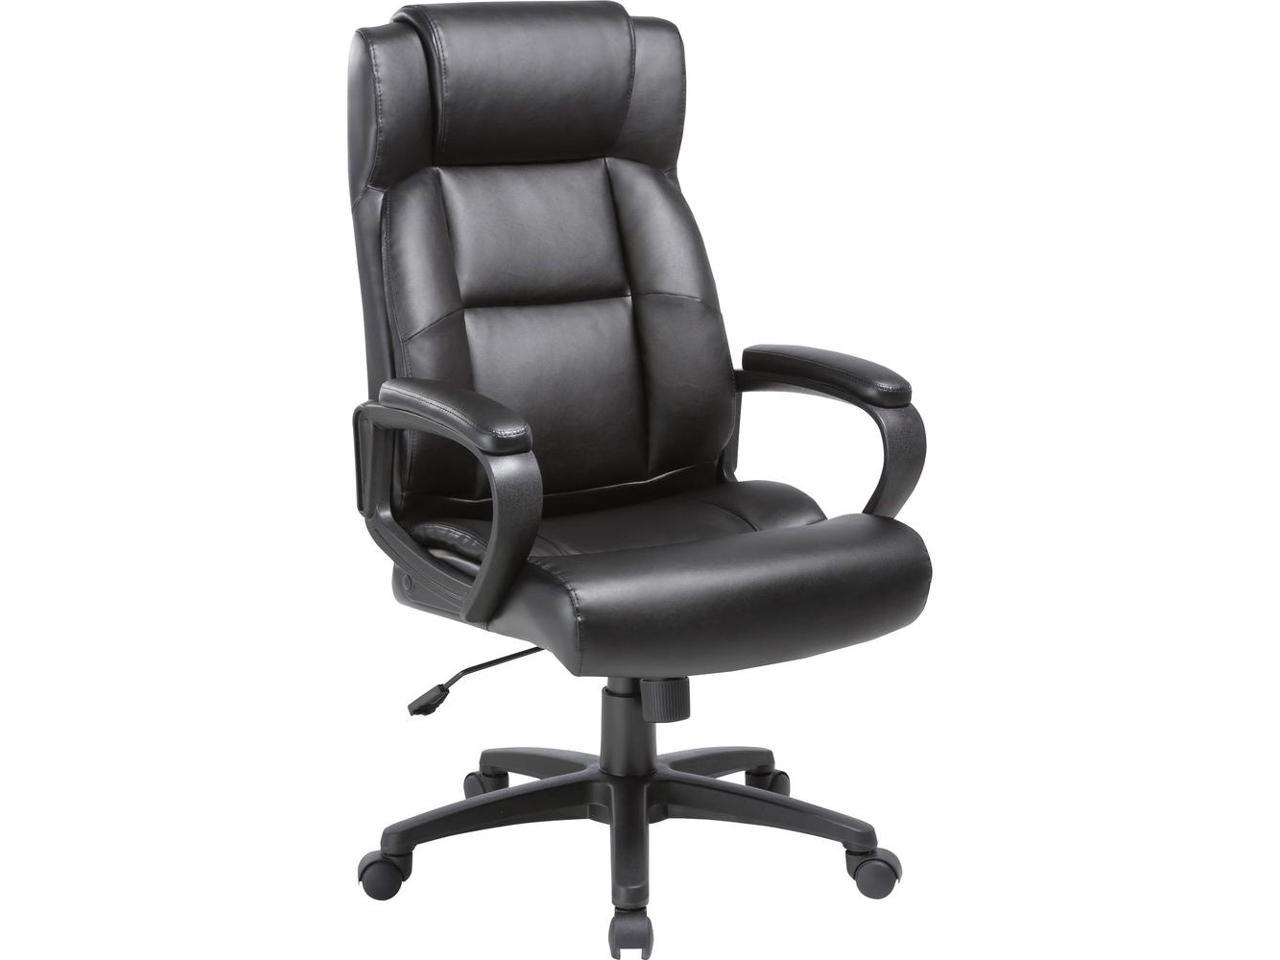 Lorell Soho High-back Leather Executive Chair - Black Bonded Leather Seat - Black Bonded Leather Back - 5-star Base - 18.39" Seat Width - 28.5" Length x 29" Width x 28" Depth x 46" Height - 1 Each - image 1 of 7